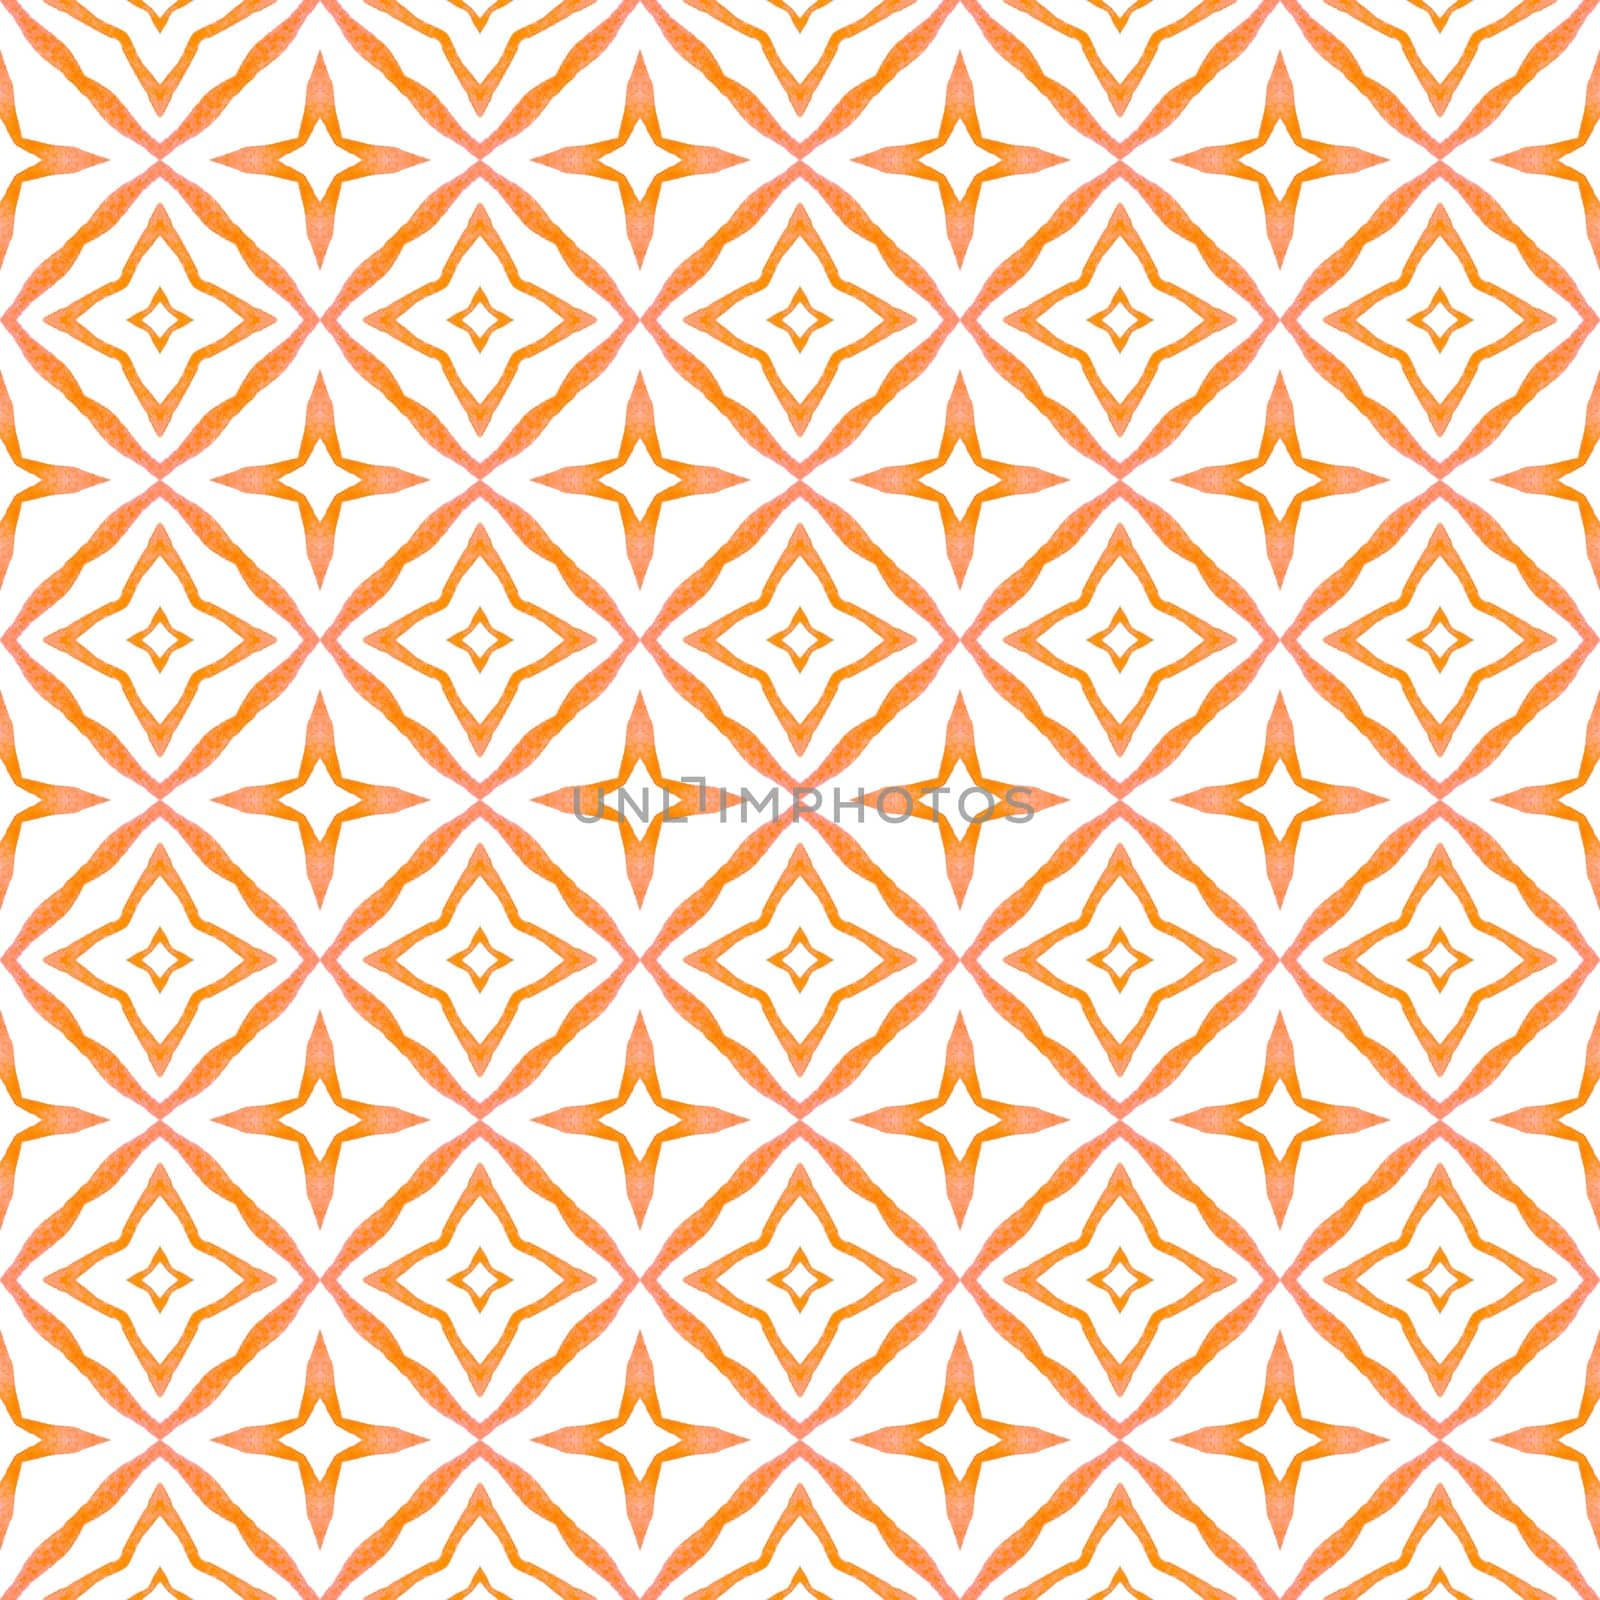 Tiled watercolor background. Orange fancy boho chic summer design. Textile ready ideal print, swimwear fabric, wallpaper, wrapping. Hand painted tiled watercolor border.